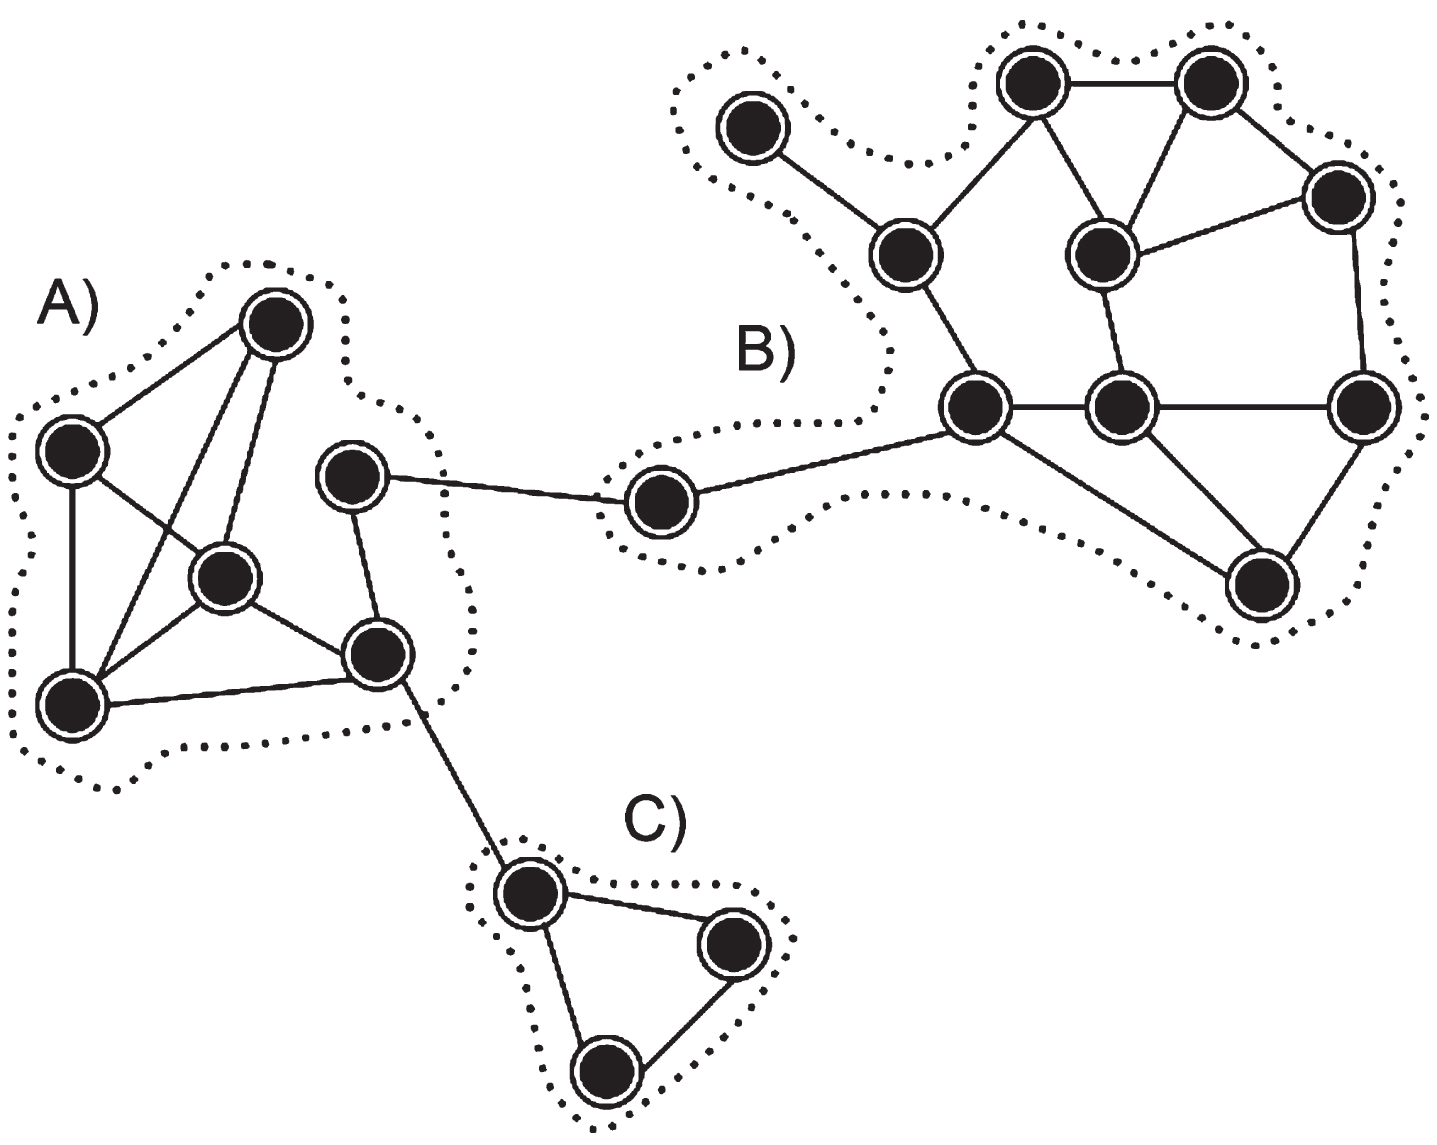 Example of communities in complex networks.